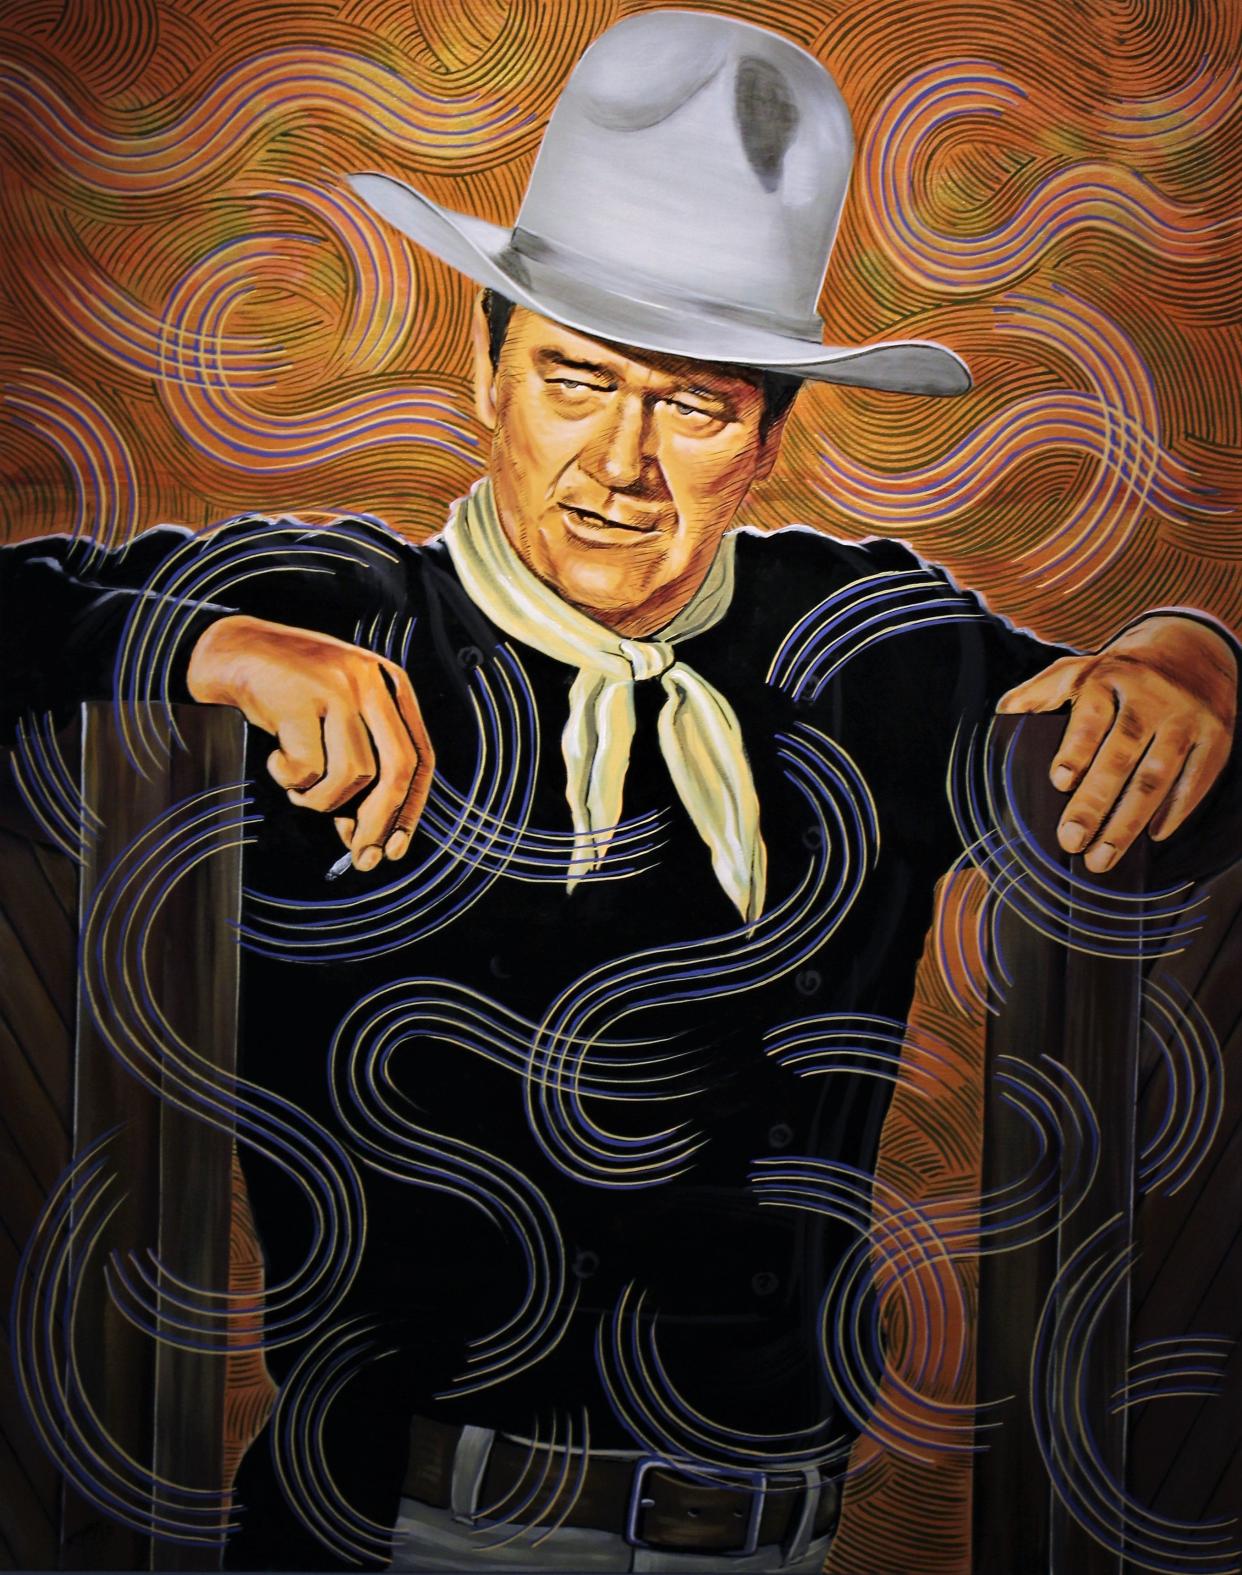 "John Wayne No. 7" by Chuck Roach, an acrylic on canvas on display in the group show "Heritage" at the Center for Contemporary Arts.